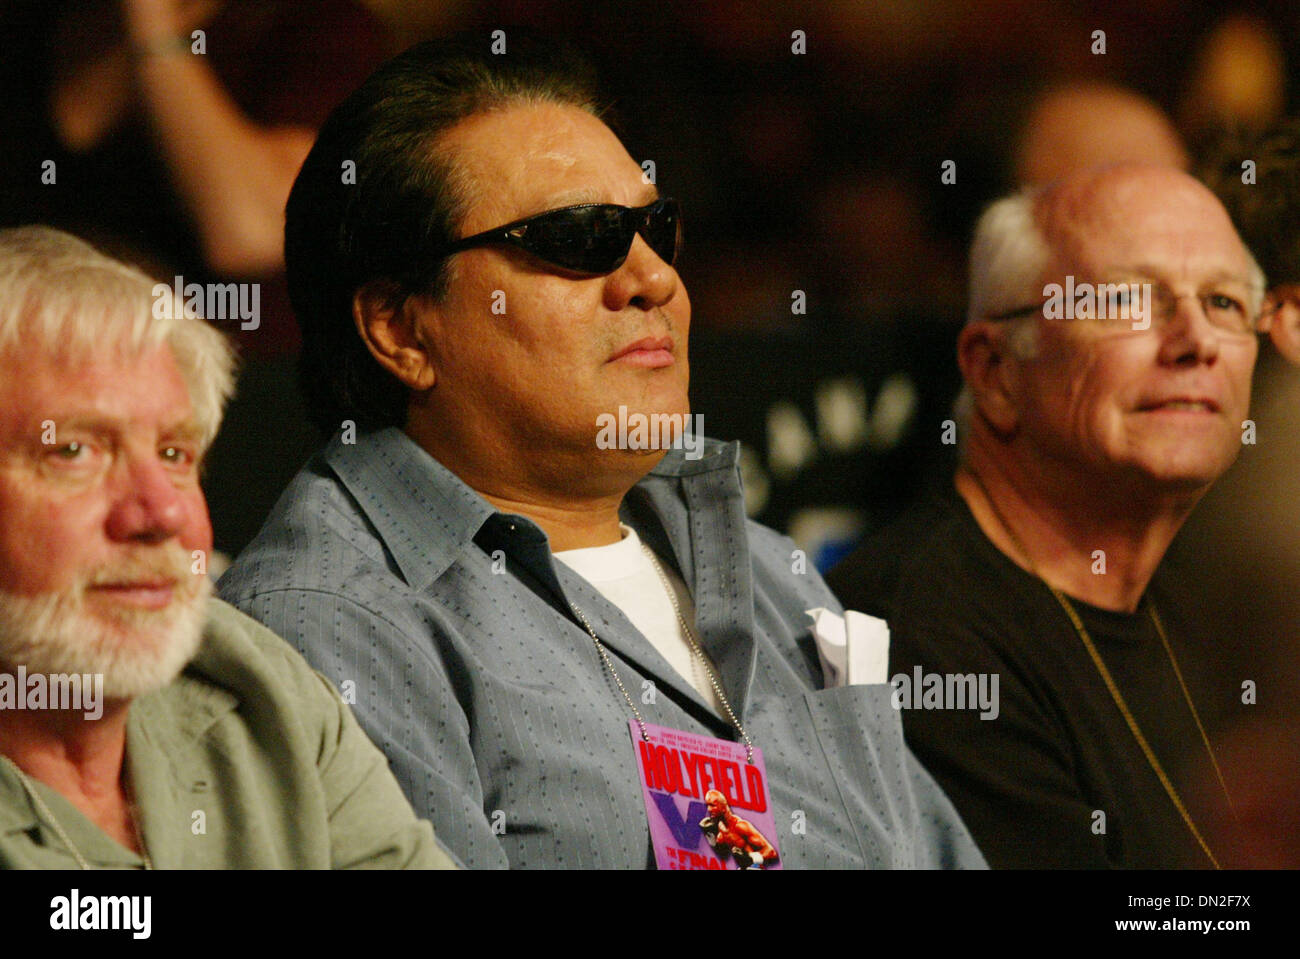 Aug 18, 2006; Dallas, TX, USA; Evander Holyfield defeats Jeremy Bates for his comeback heavyweight bout. Holyfield won by TKO in the second round. Pictured, ROBERTO DURAN was in Dallas watching welterweight boxer Julio Cesar 'Baby Face' Garcia, whom Duran manages, battle Alfonso Sanchez on the Holyfield-Bates undercard. Mandatory Credit: Photo by Robert Hughes/ZUMA Press. (©) Copyr Stock Photo